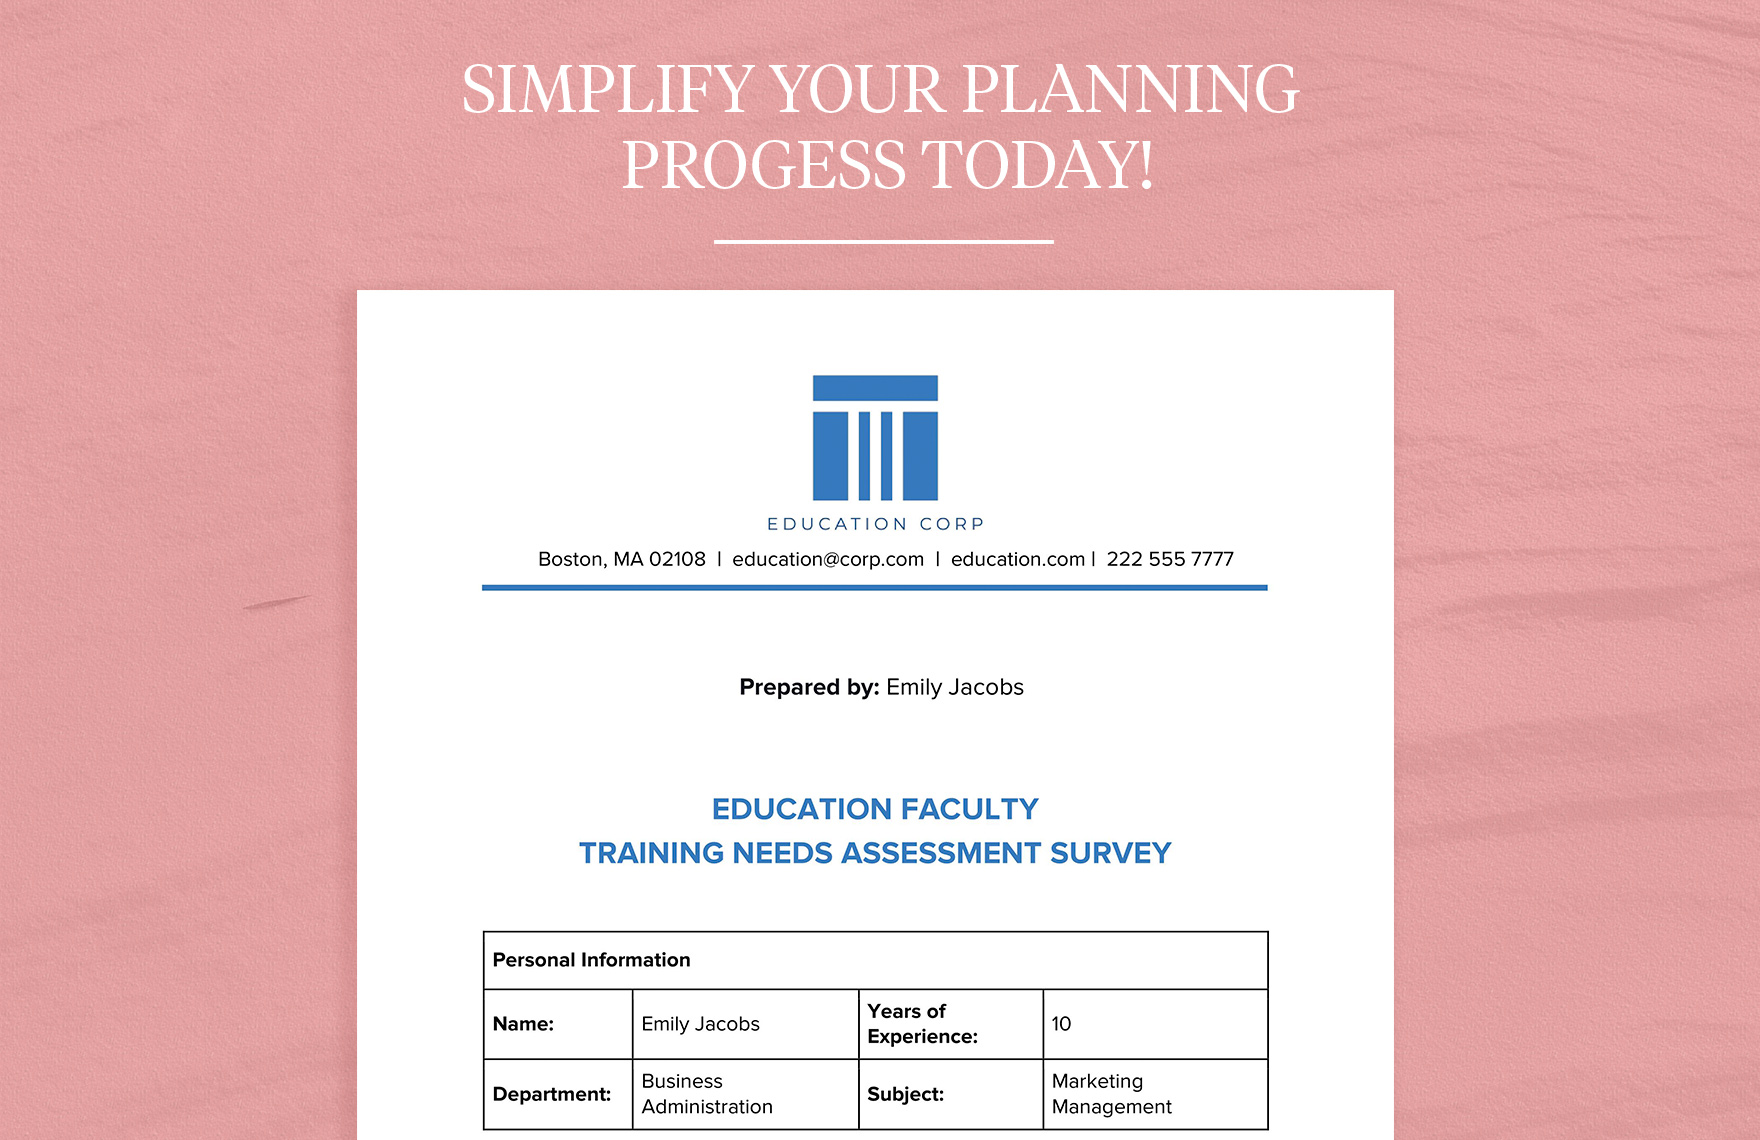 Education Faculty Training Needs Assessment Survey